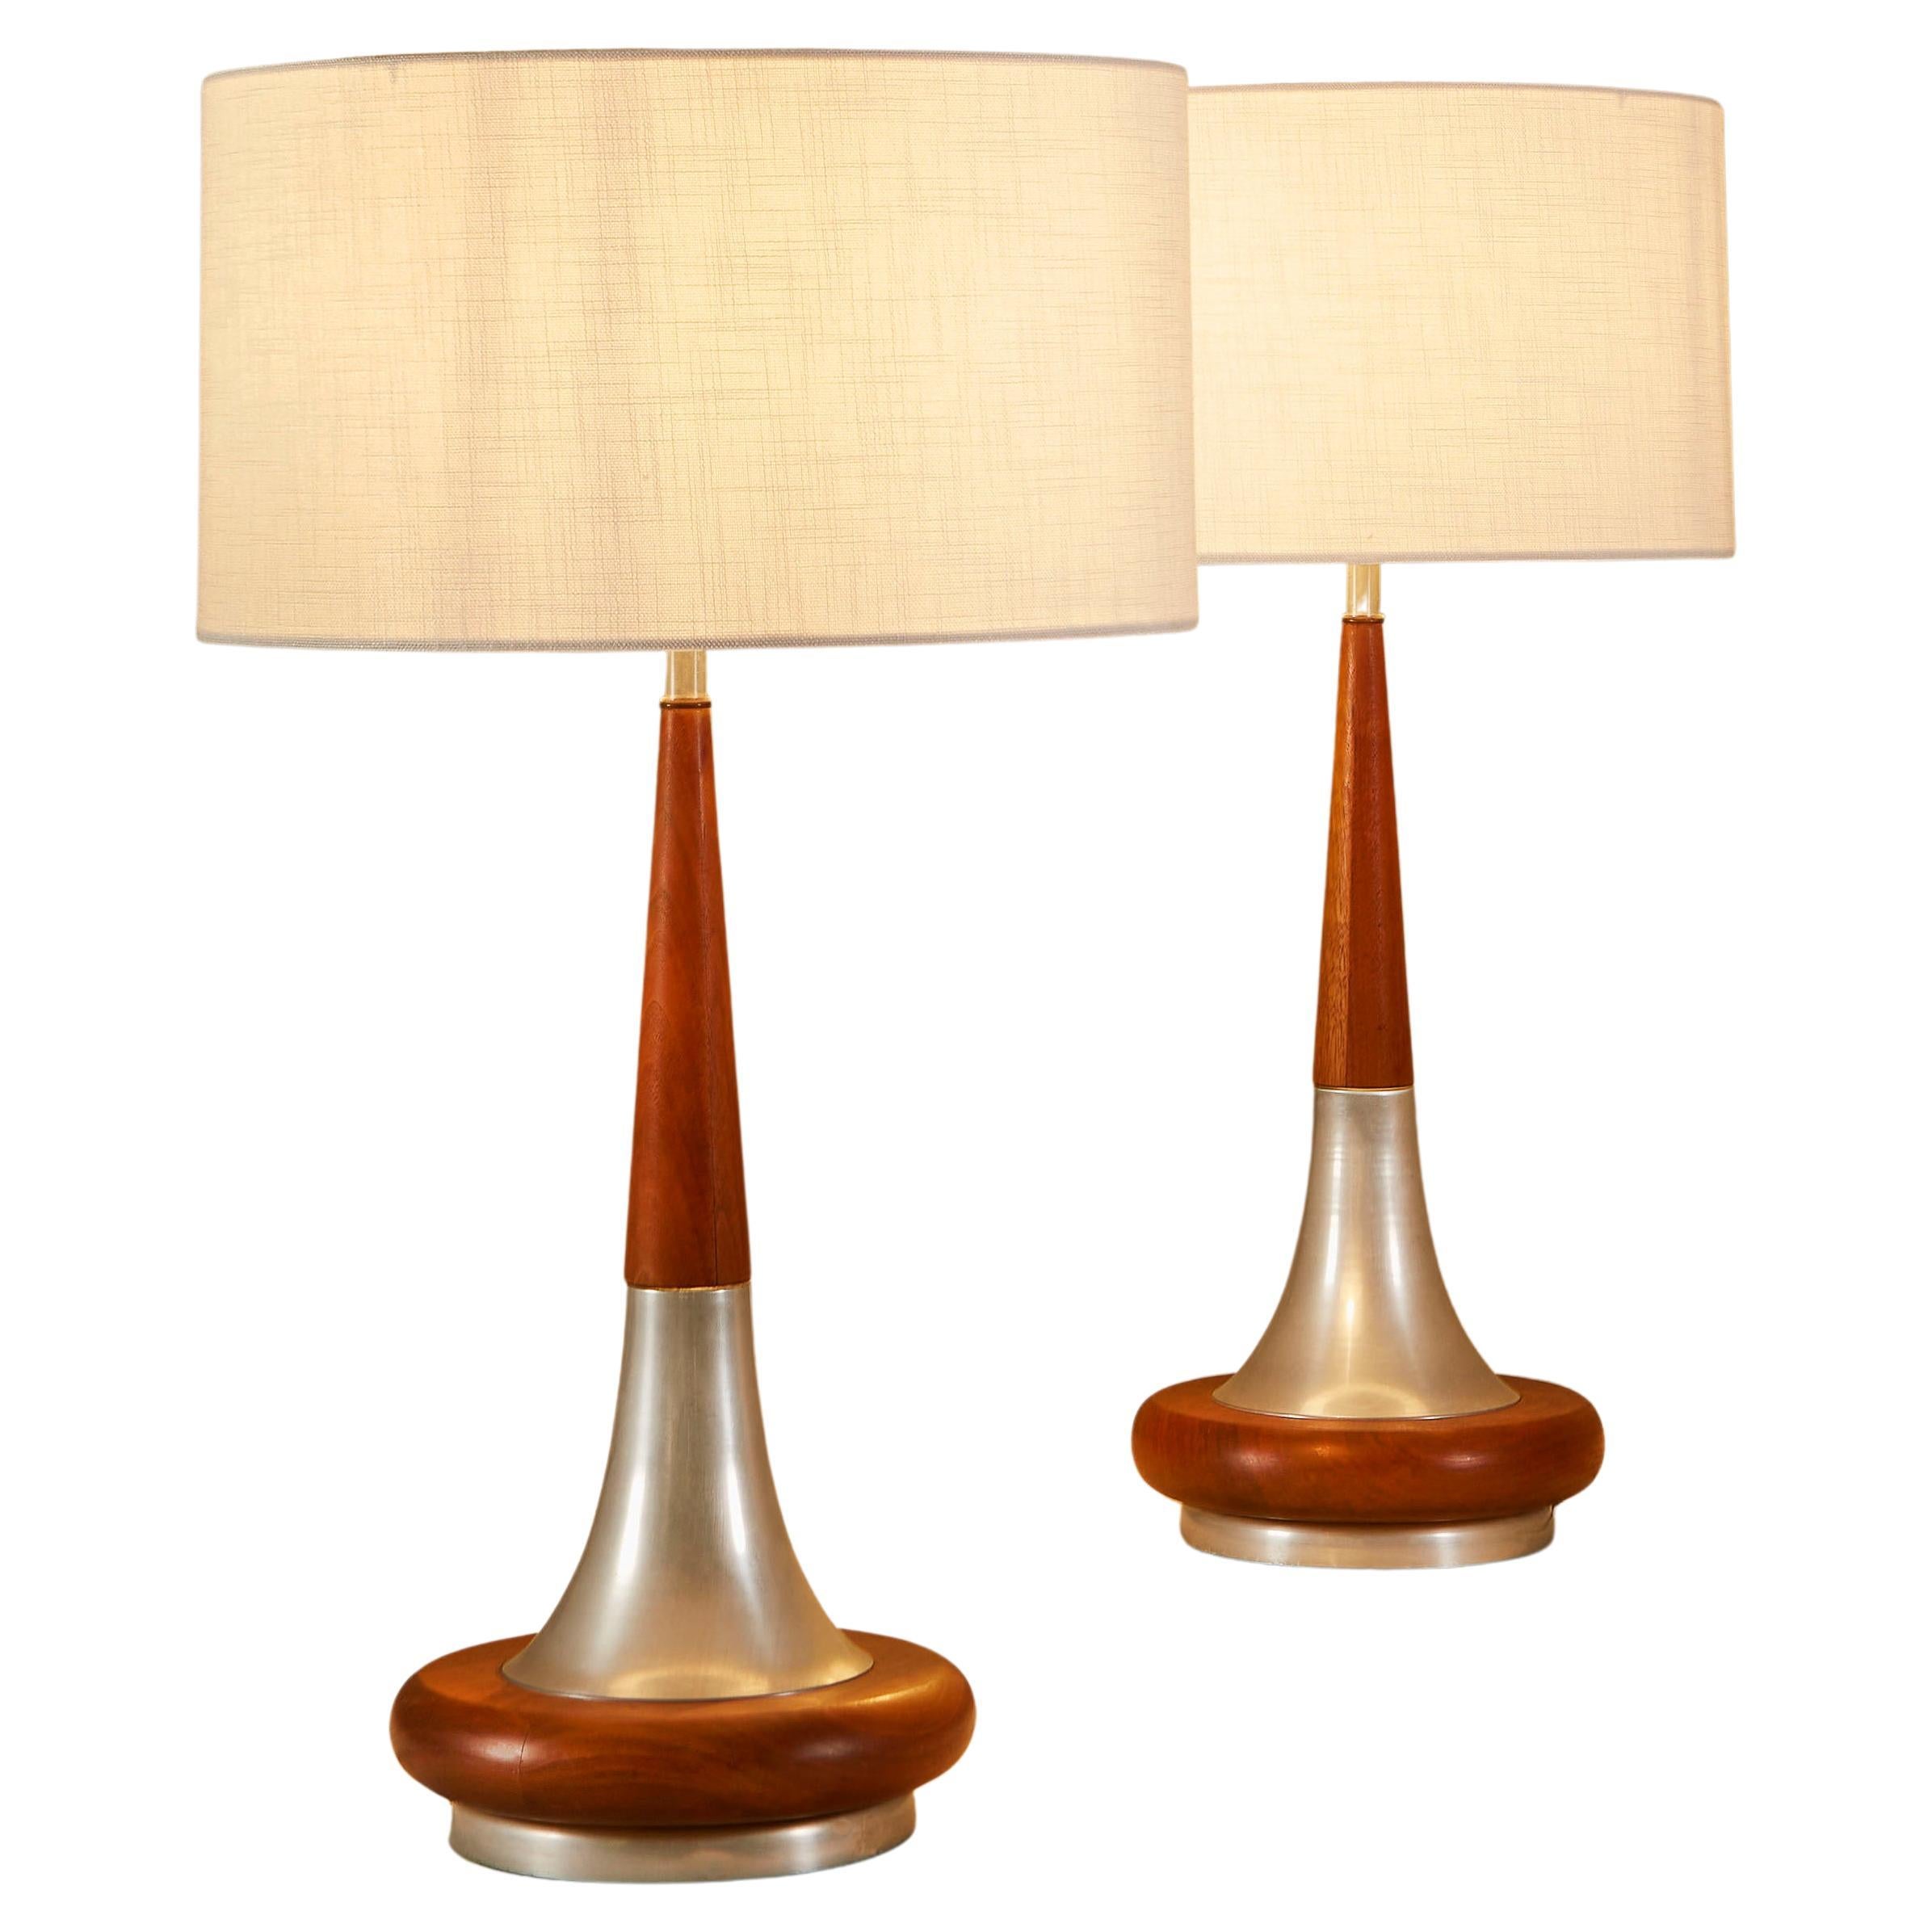 Pair of Tall Mid-Century Modern American Walnut and Chrome Table Lamps For Sale